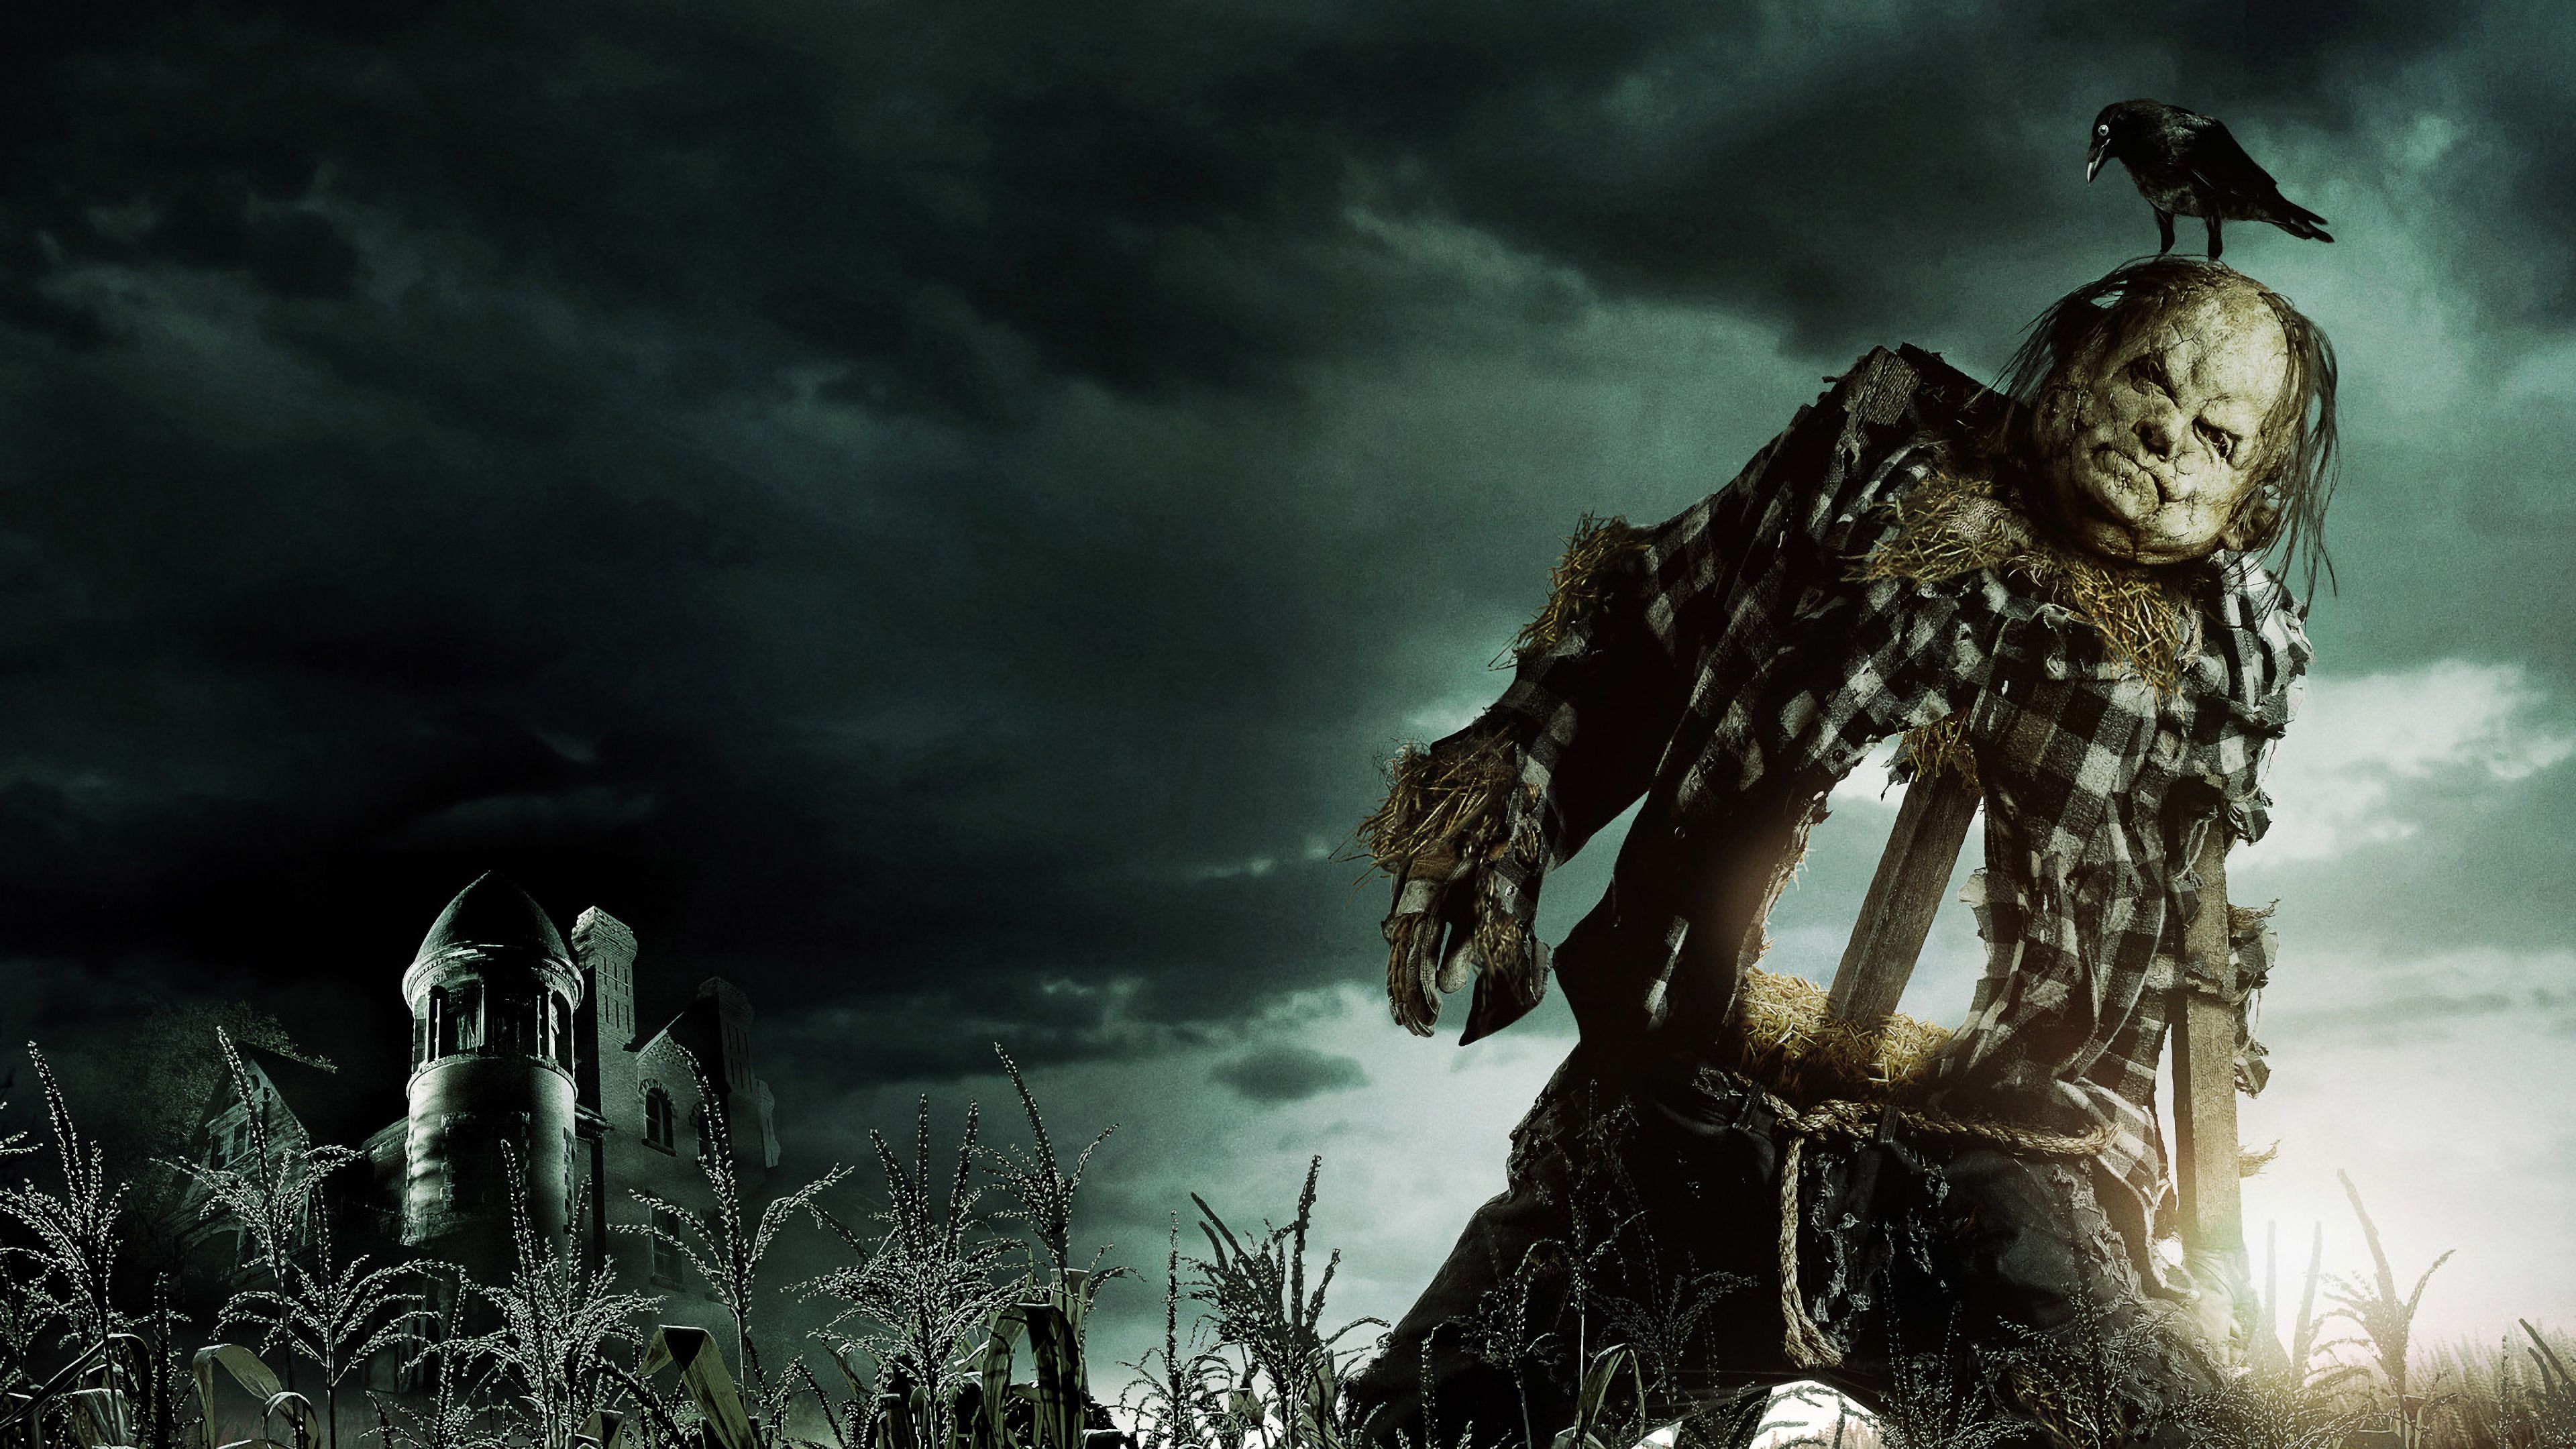 Scary Stories to Tell in the Dark 4K Wallpaper